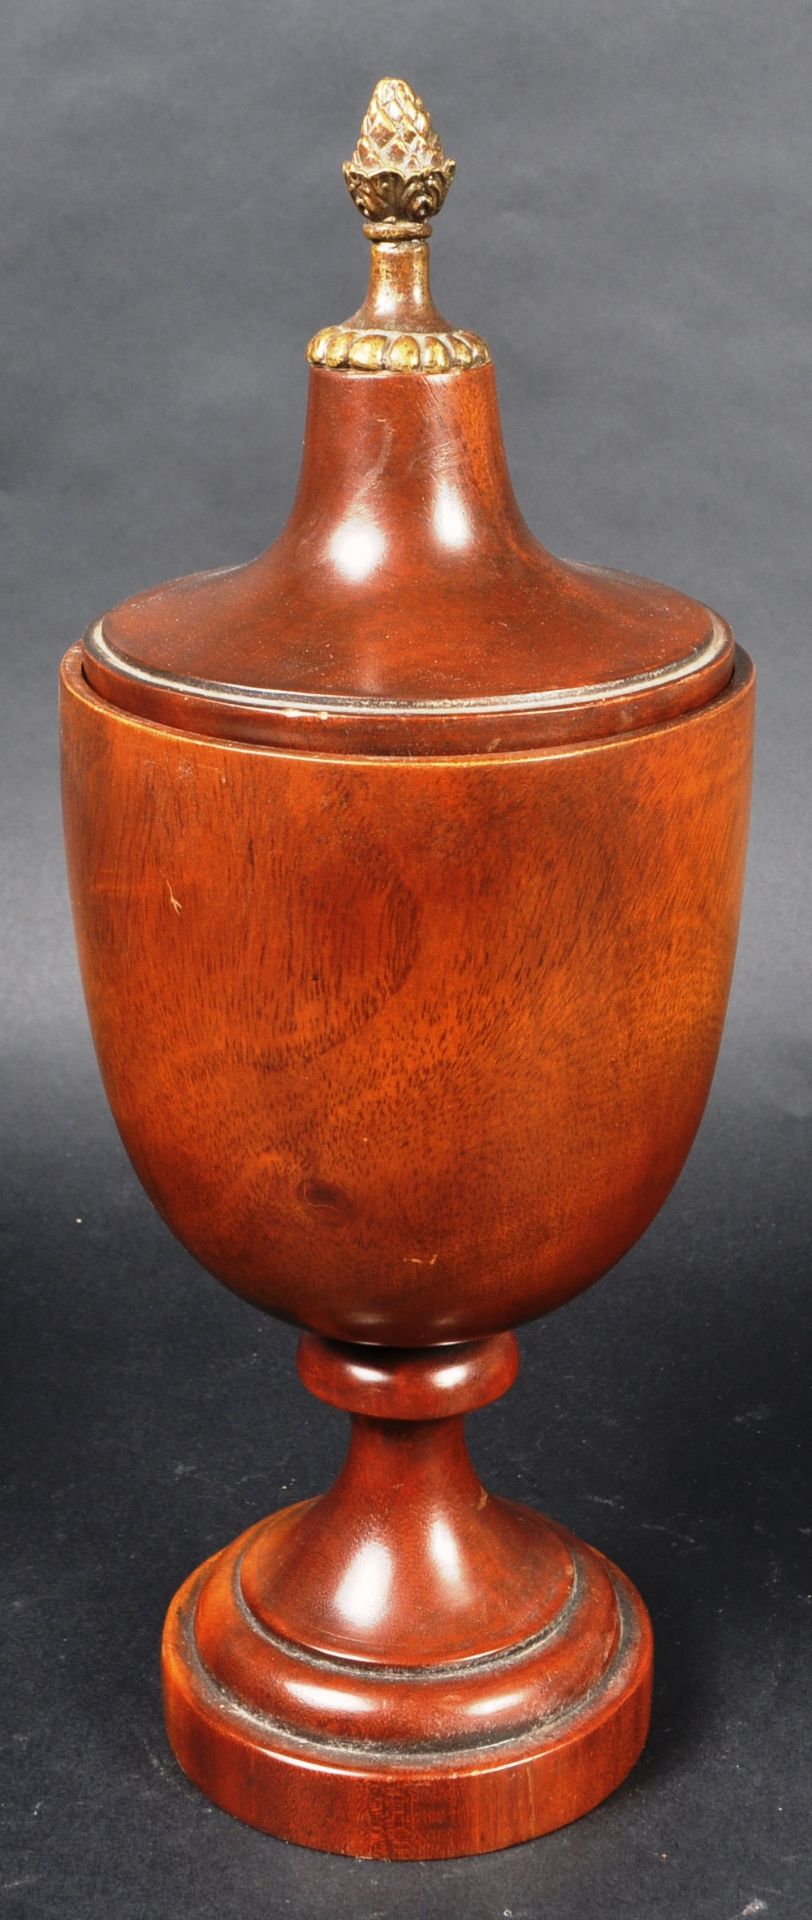 19TH CENTURY TURNED TREEN TOBACCO POT - Image 5 of 7